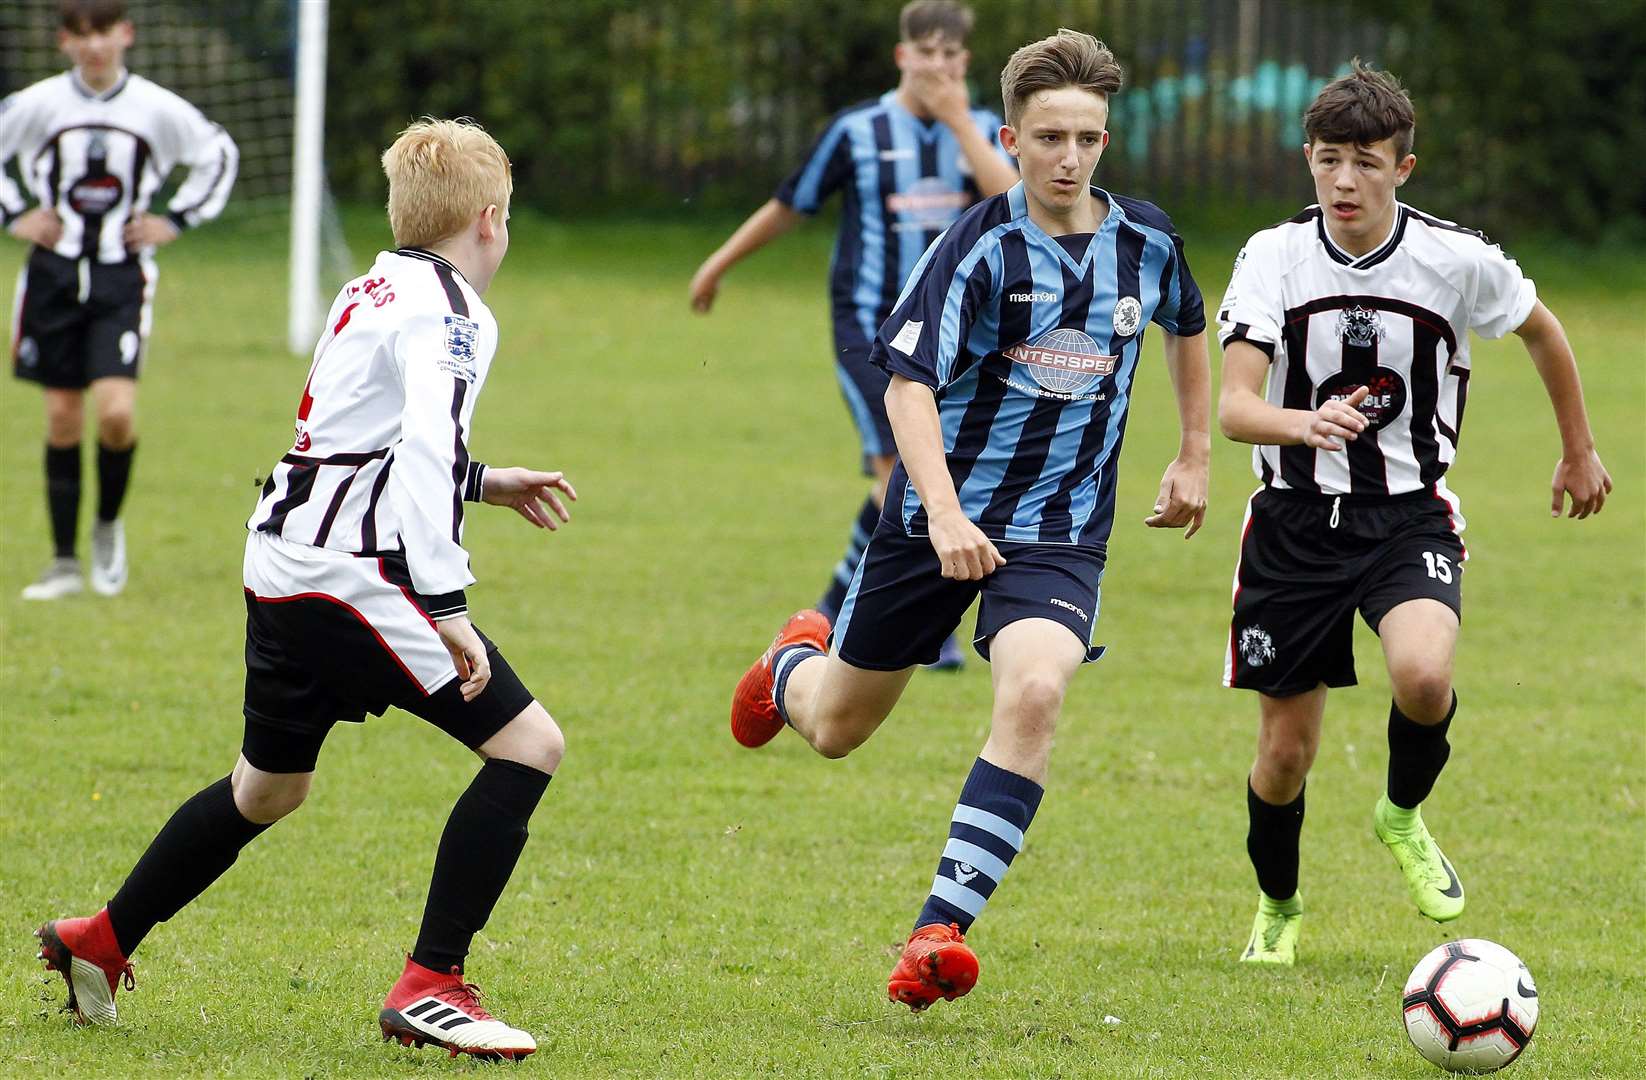 Black Lion Youth under-15 (blue and black stripes) and Milton & Fulston battle it out in Division 1 Picture: Sean Aidan